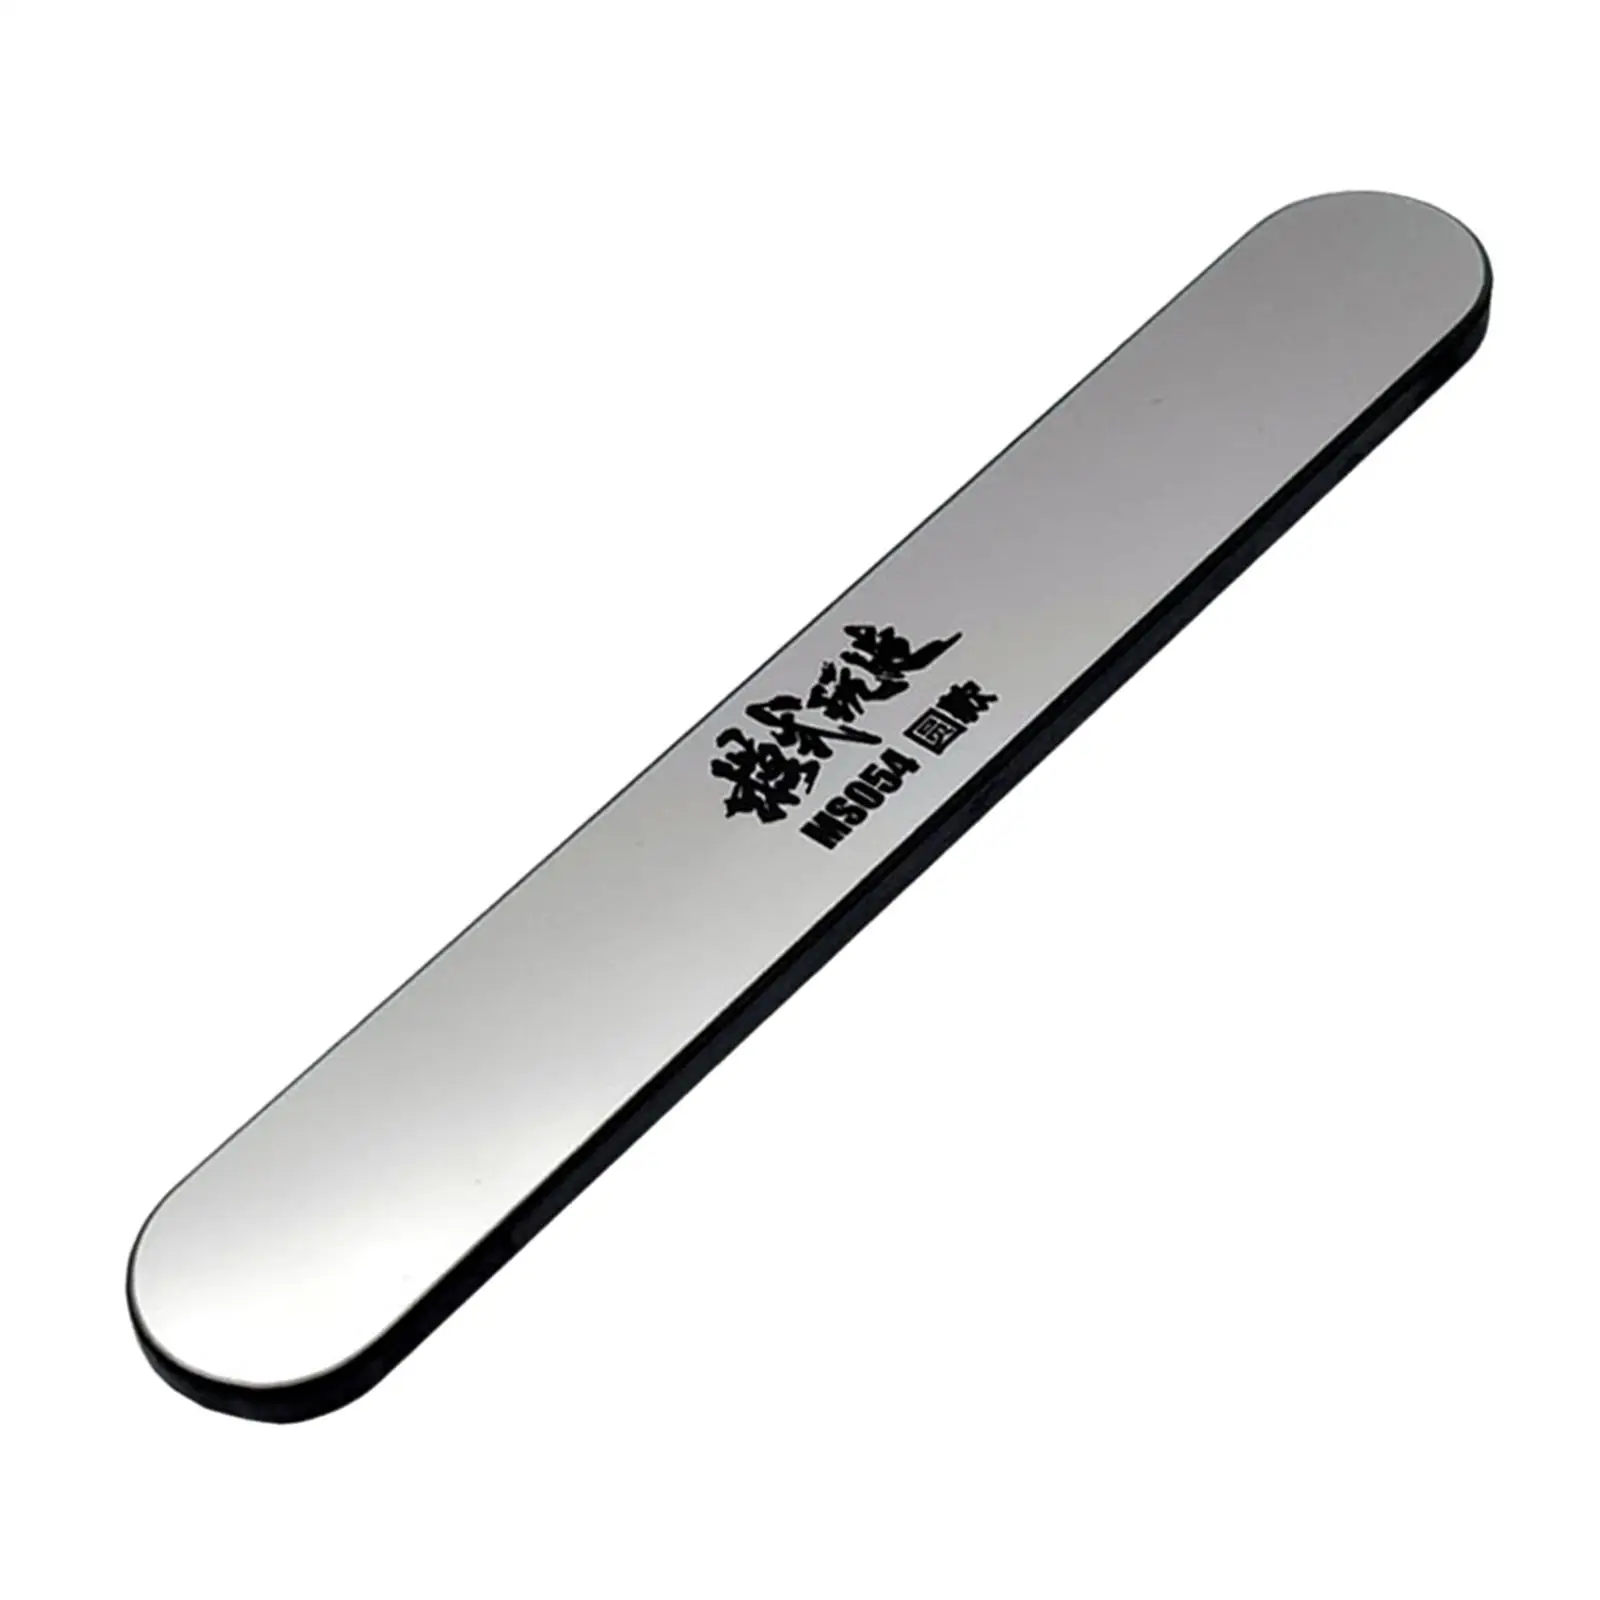 Mirror Polished Glass File for Models Grinding Tools Hobby Polishing DIY